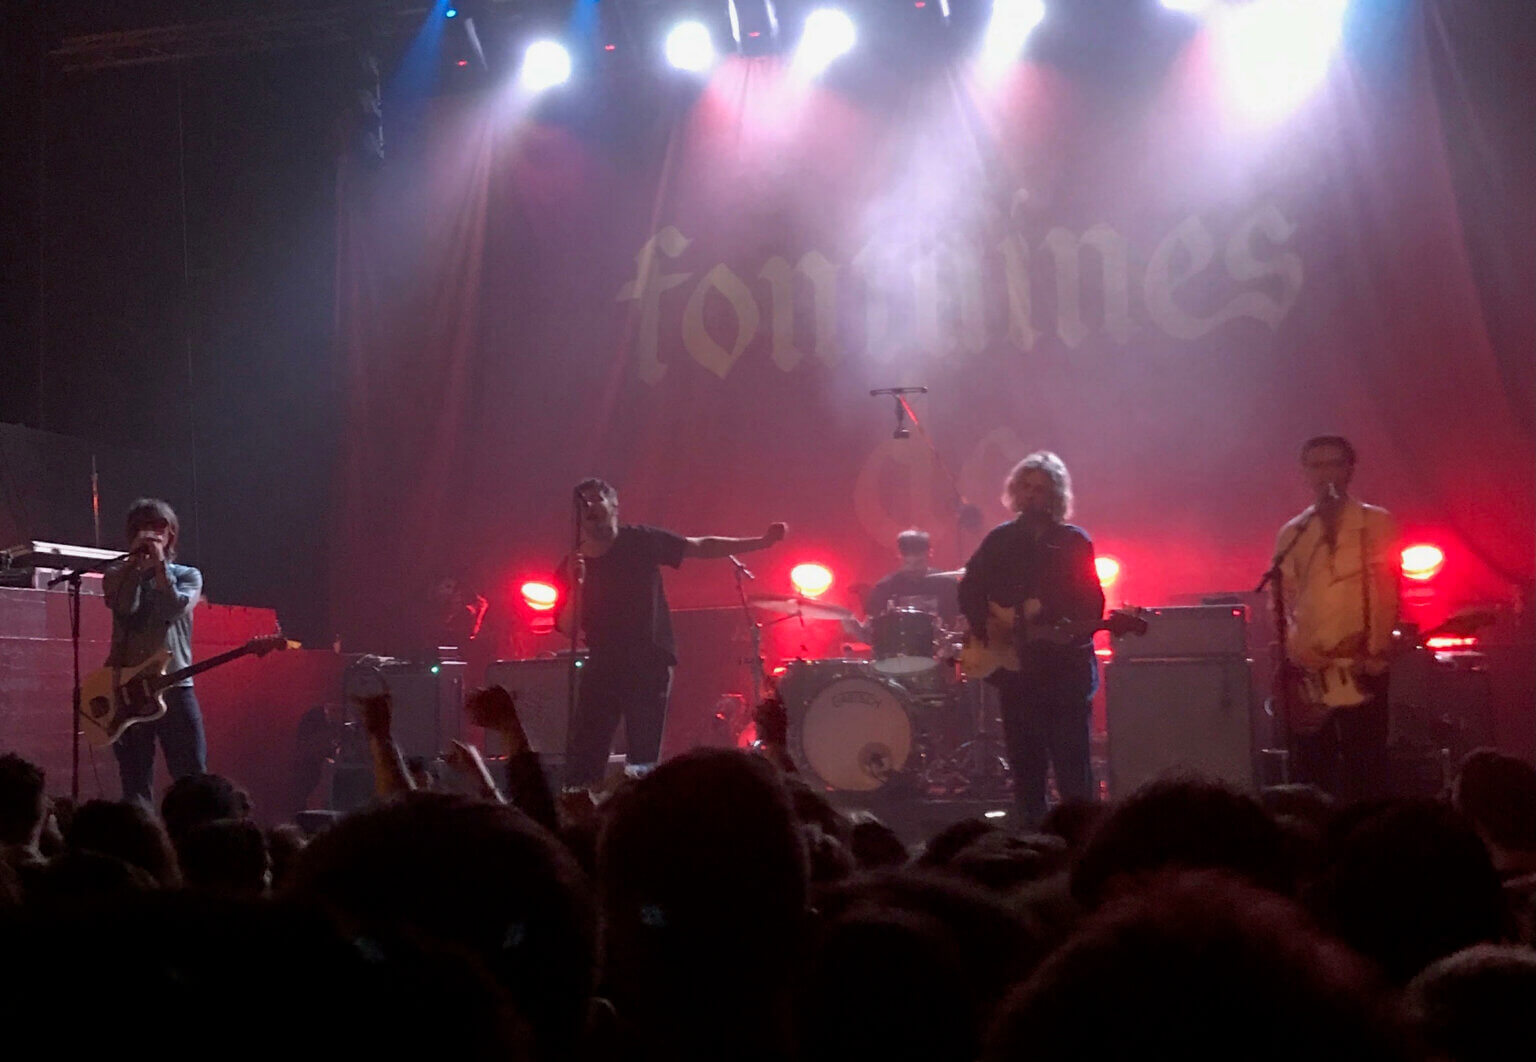 Fontaines D.C. and Just Mustard In Vancouver B.C. live review from their May 23, 2022 show by Martin Alldred